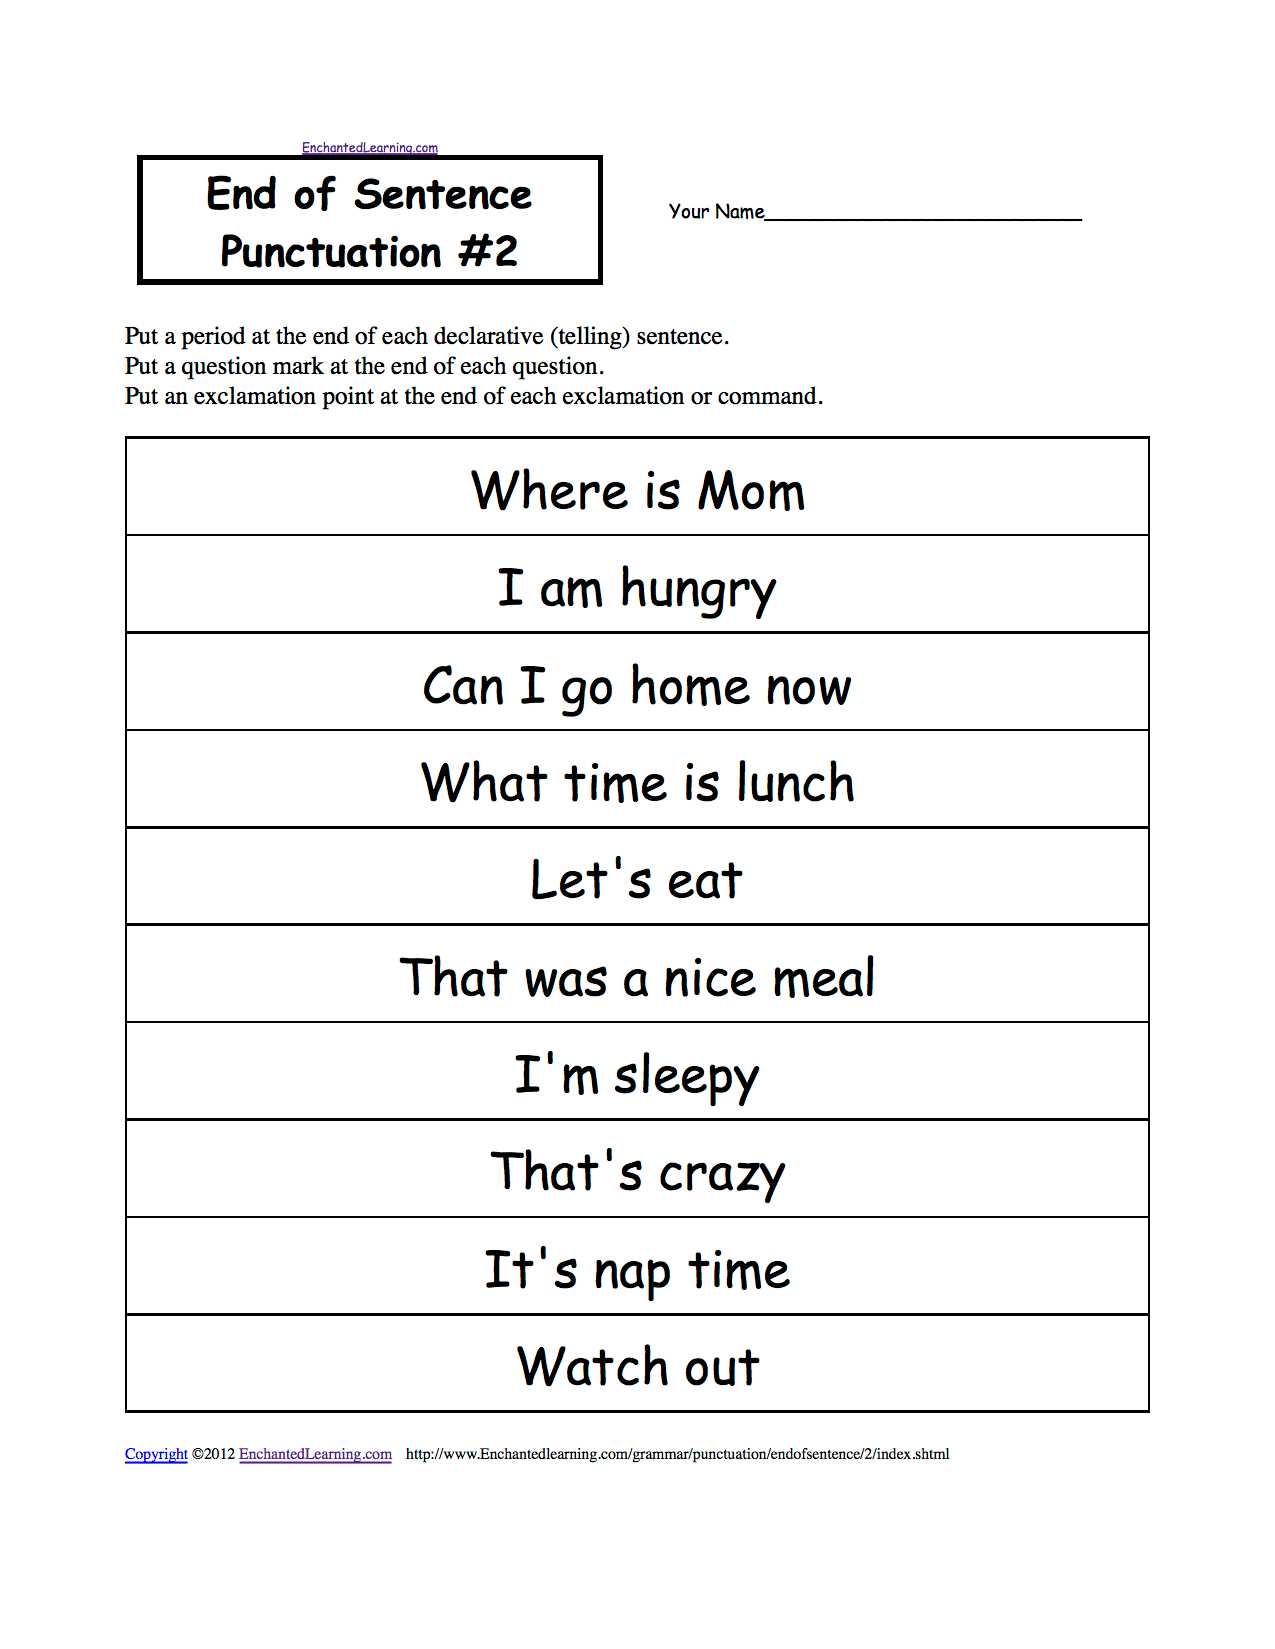 Subject Verb Agreement Practice Worksheets or Subject Verb Agreement Worksheets for Kindergarten